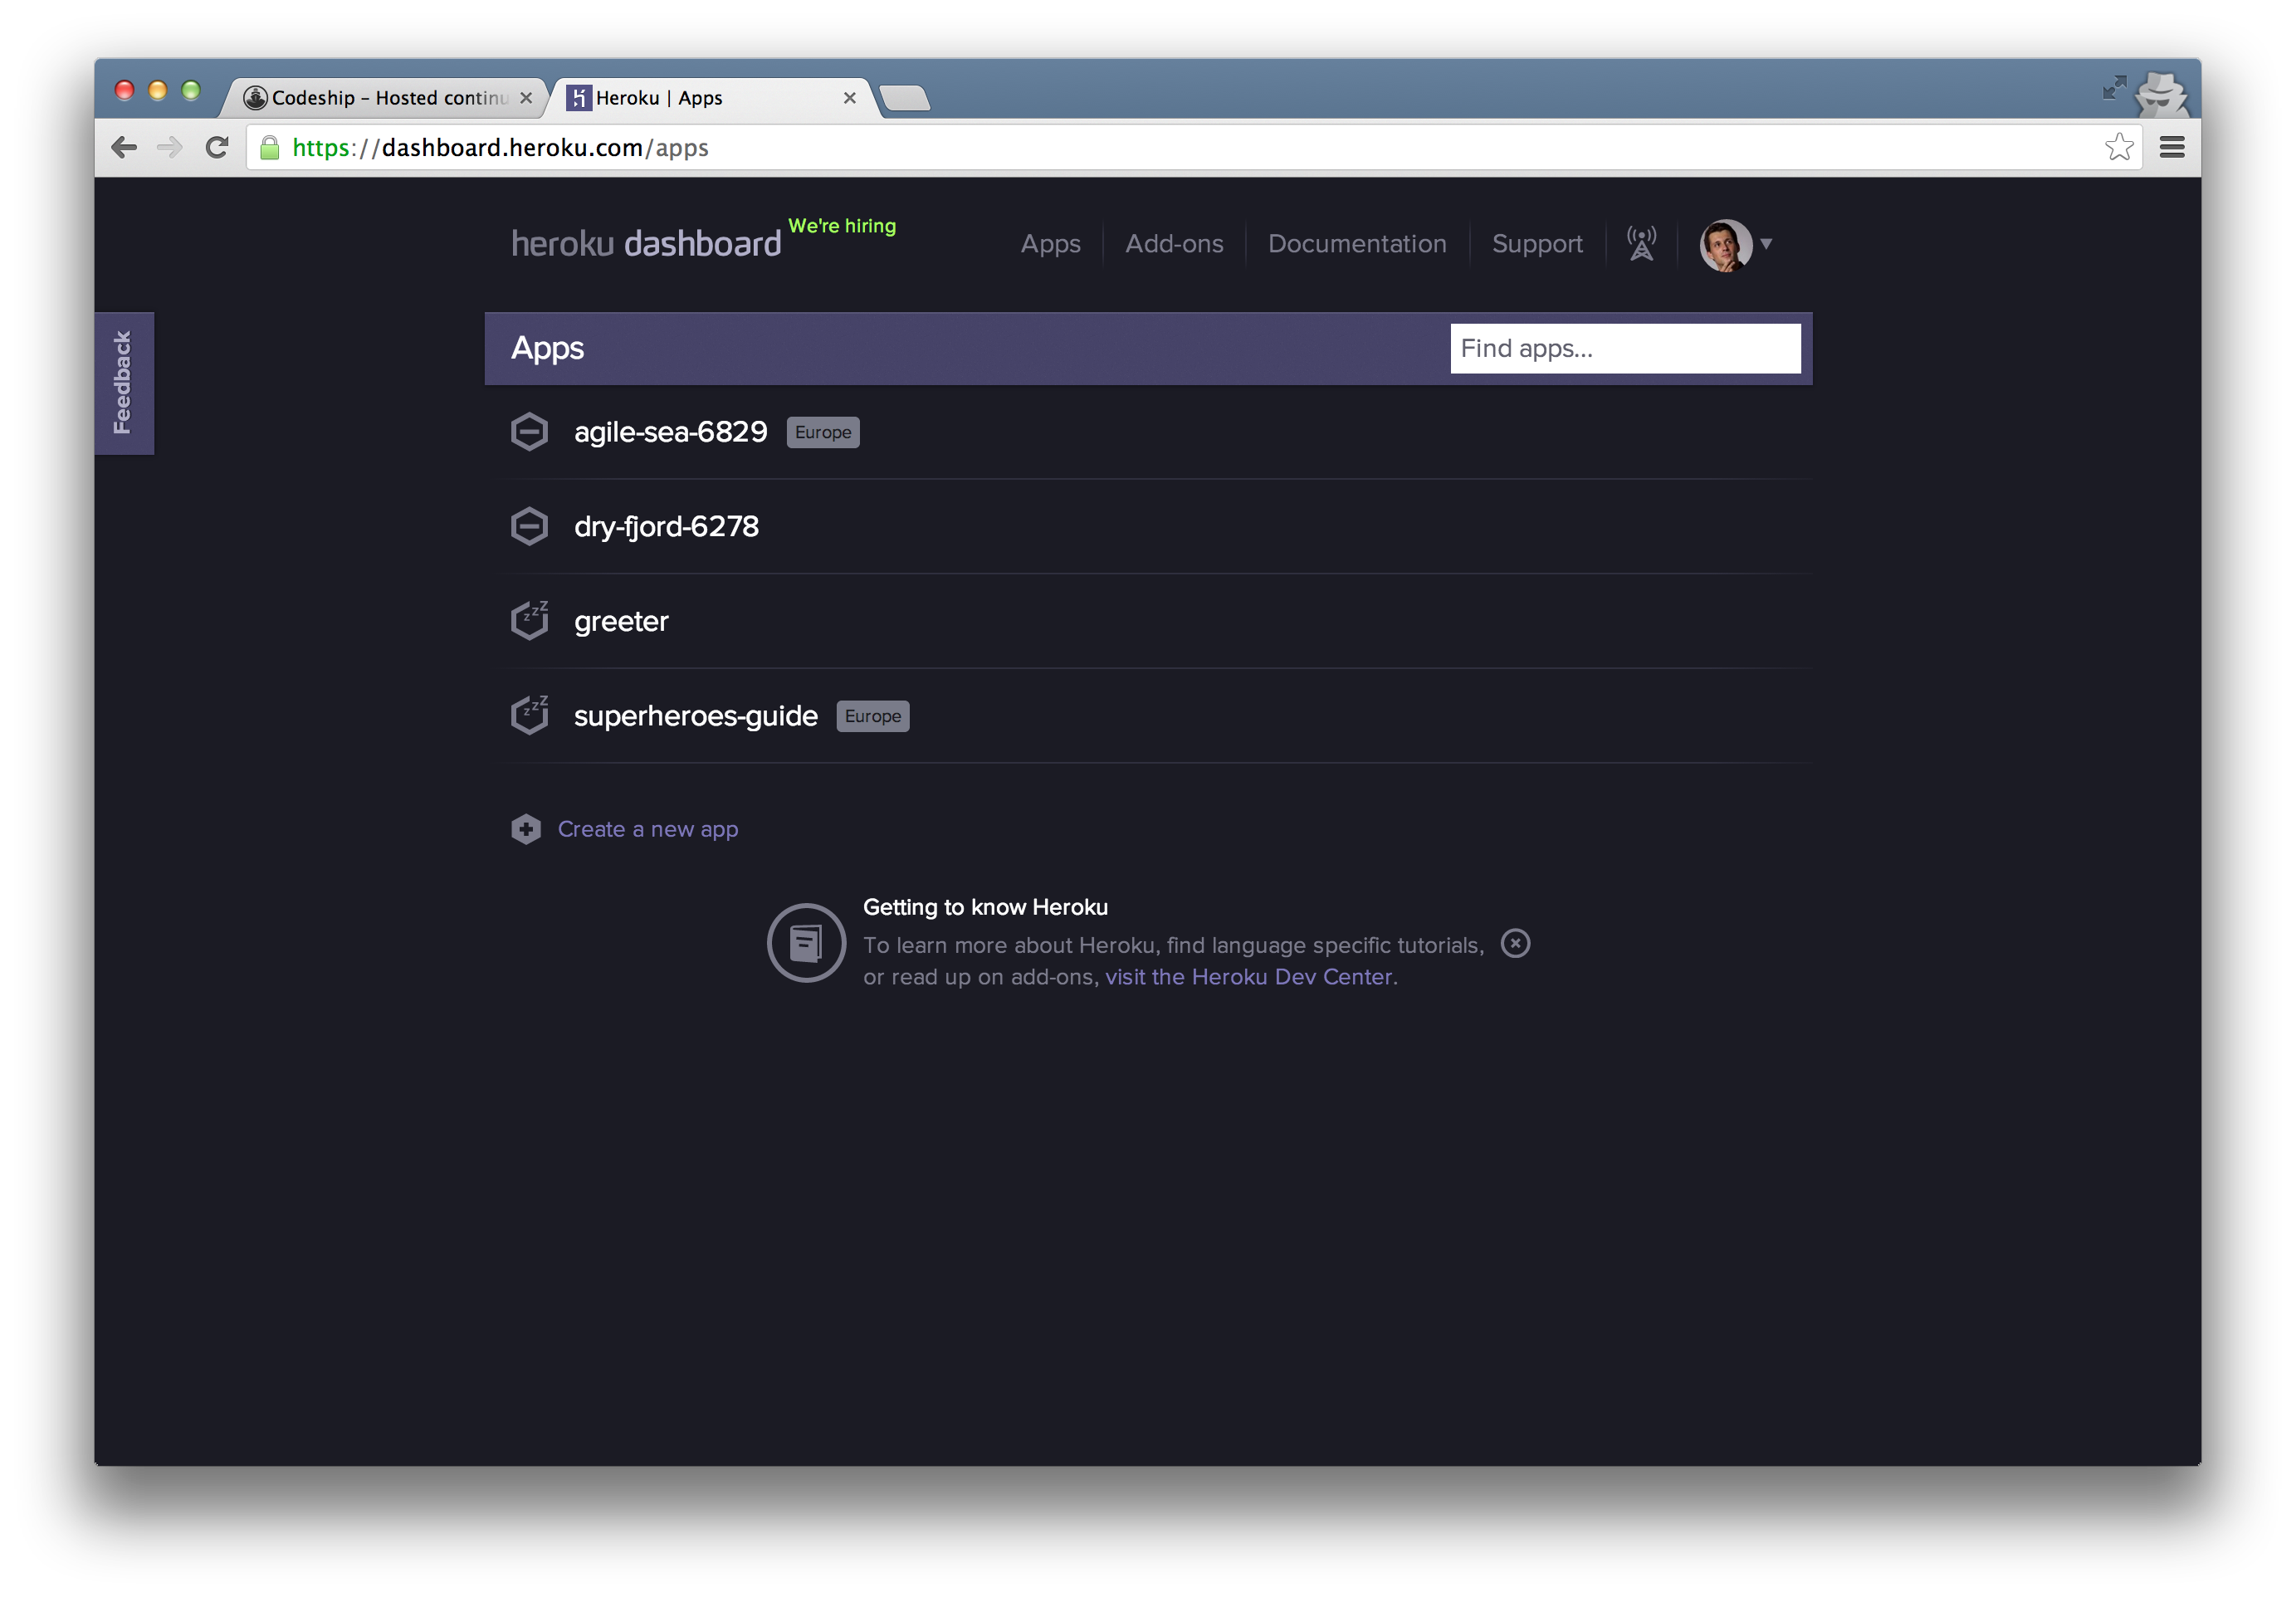 You are on the Heroku page now